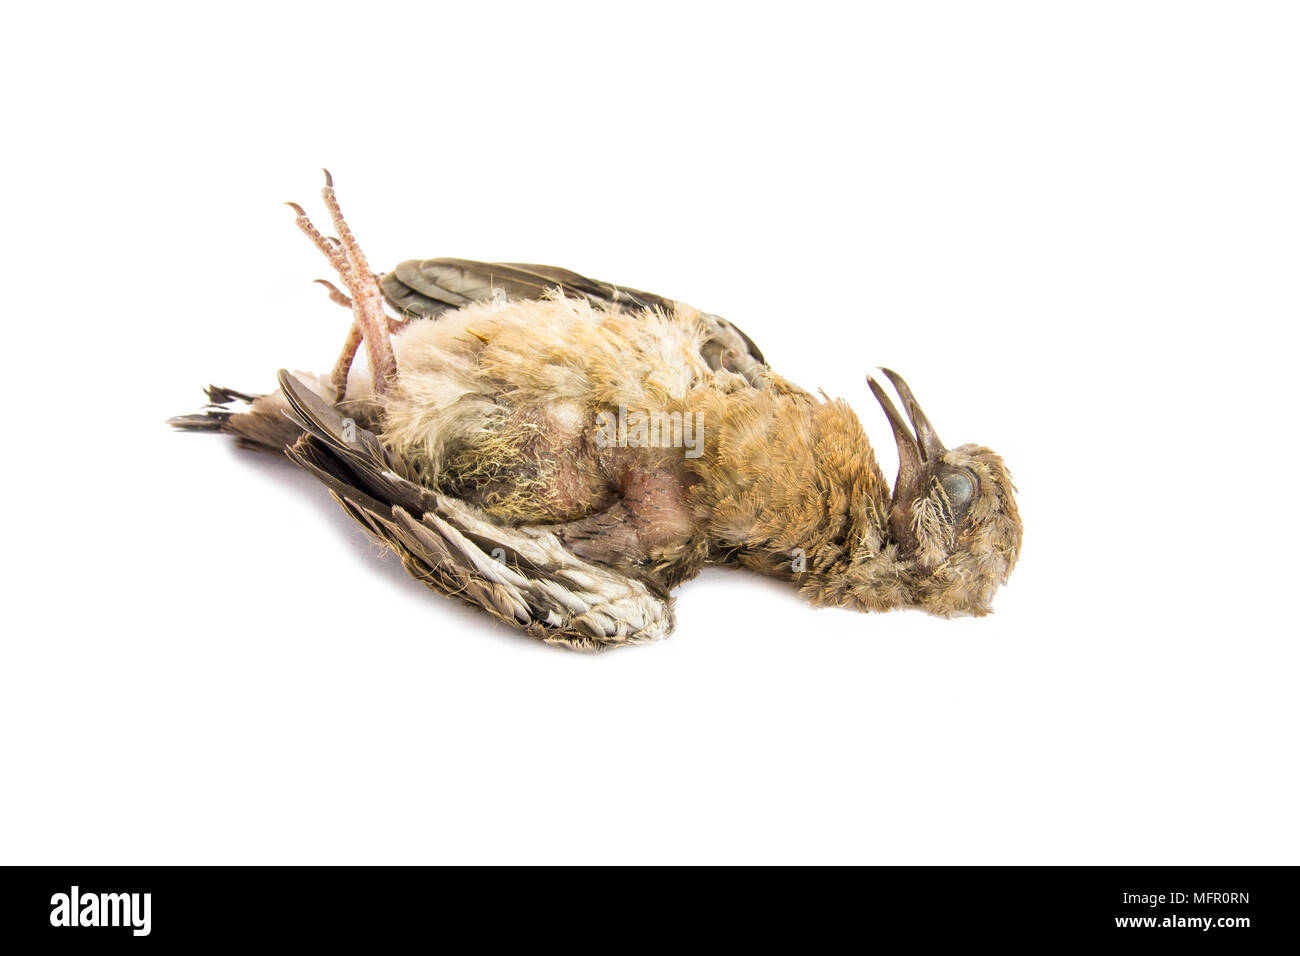 Dead bird close up, juvenile spotted dove, isolated on white background Stock Photo